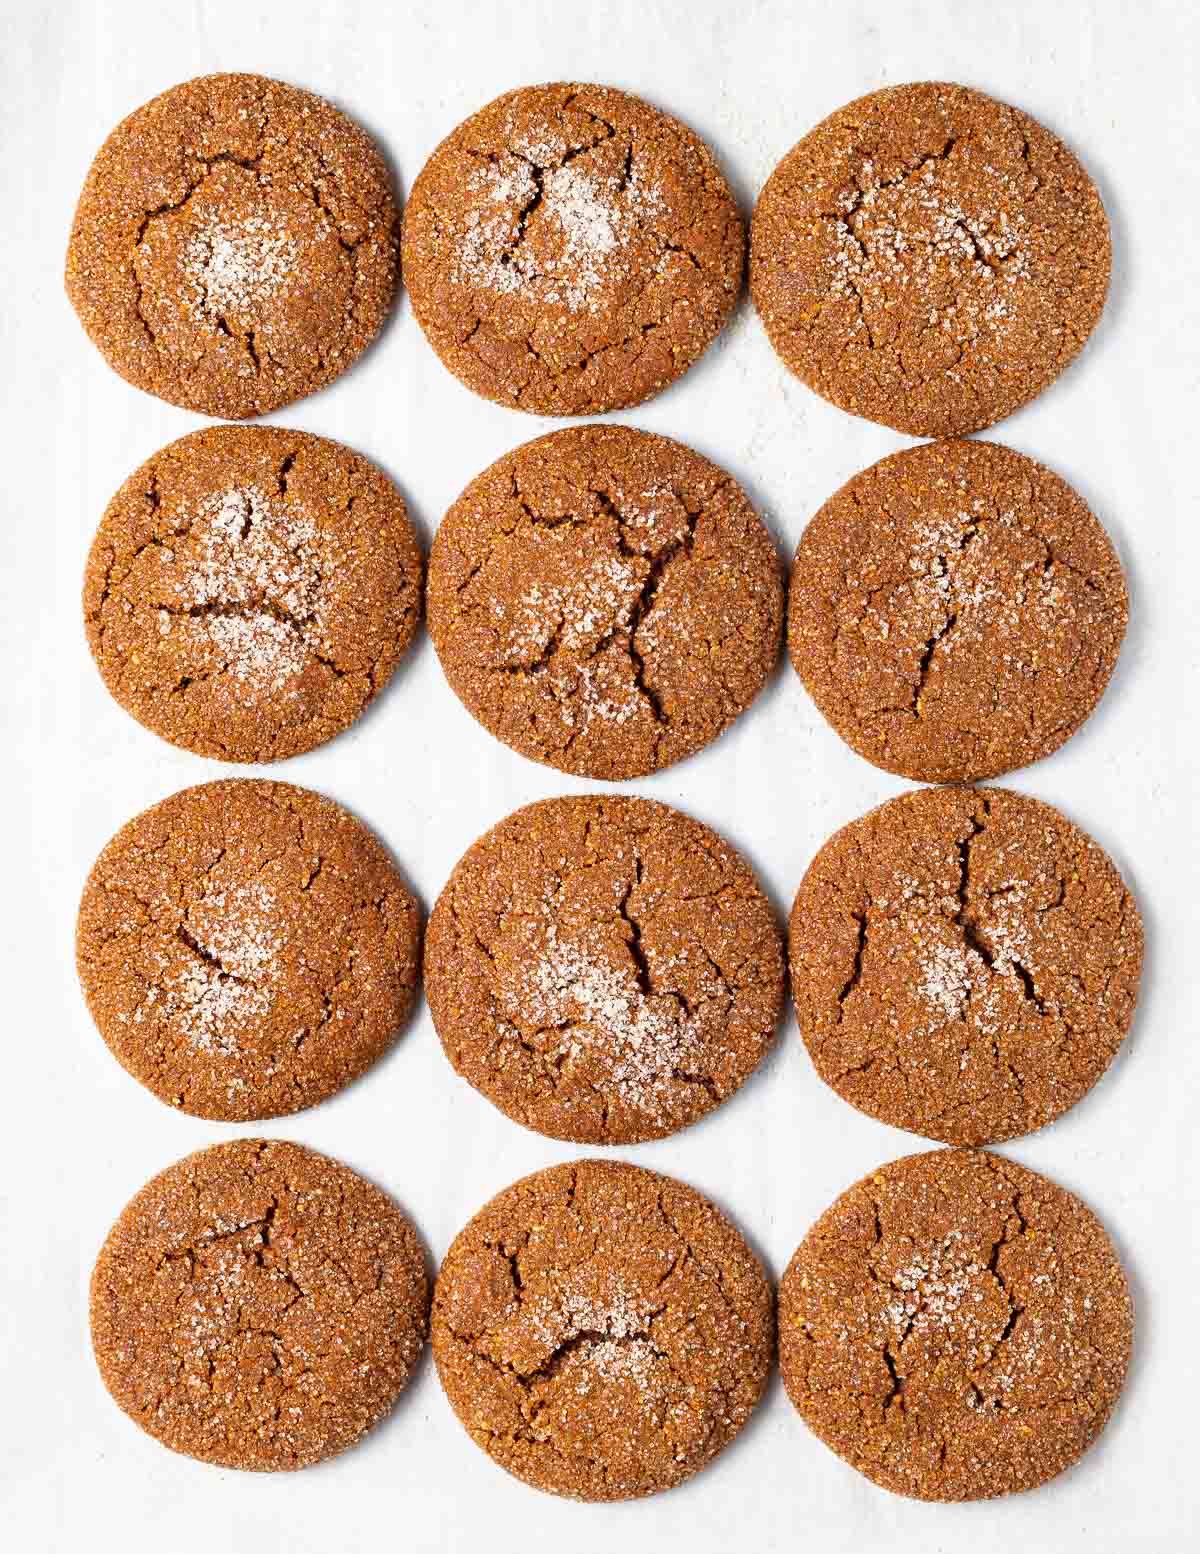 molasses cookies on a baking tray